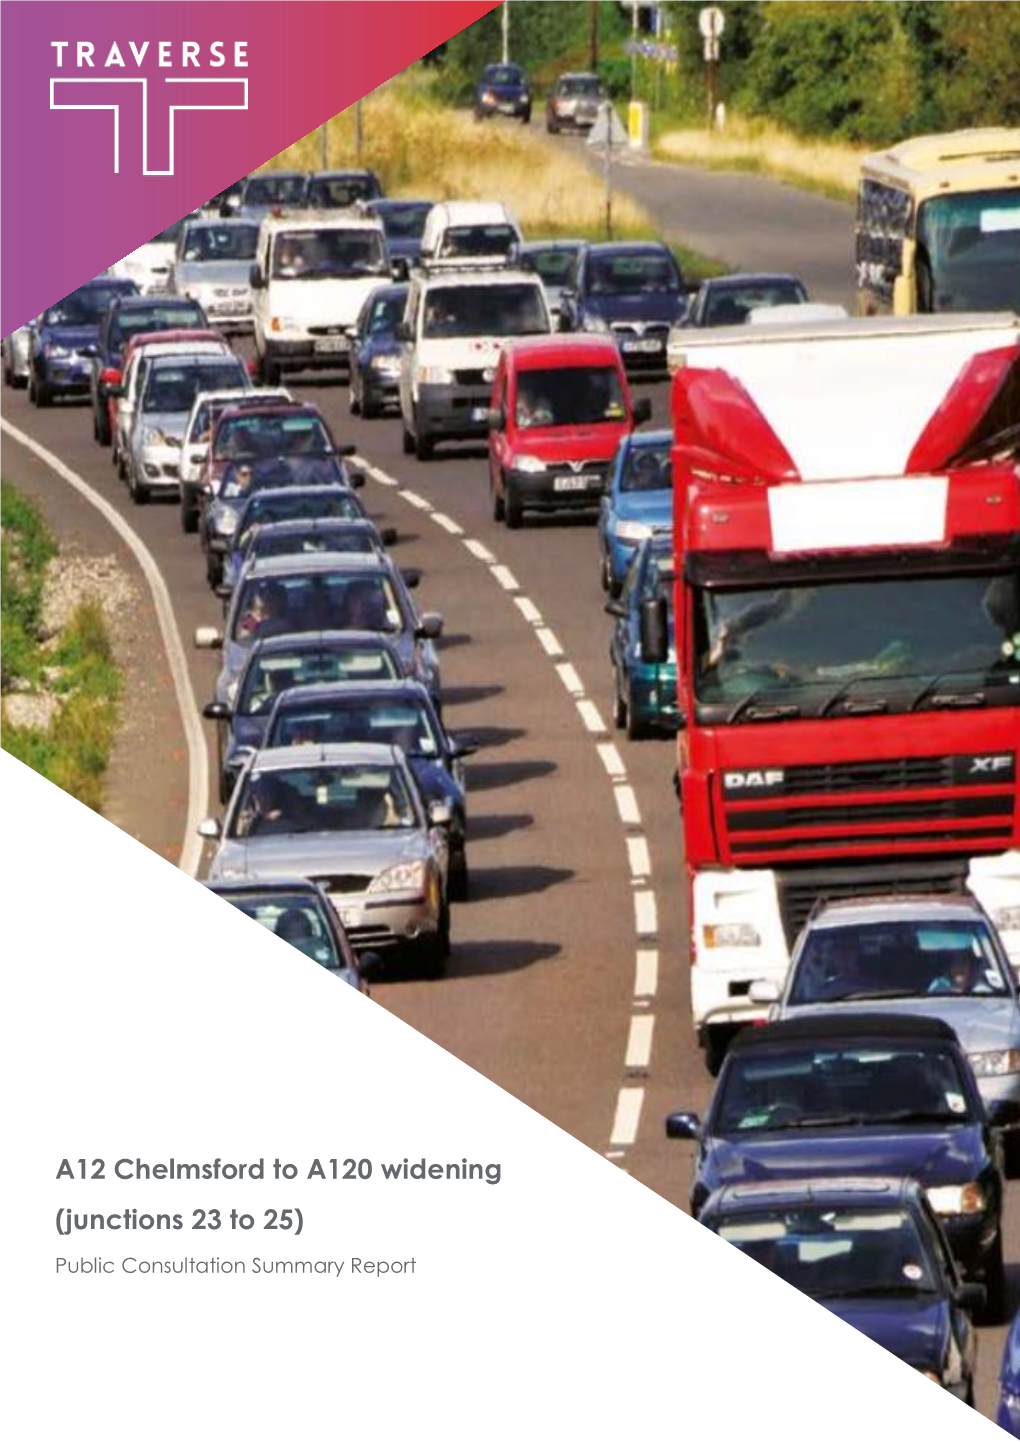 A12 Chelmsford to A120 Widening (Junctions 23 to 25) Public Consultation Summary Report